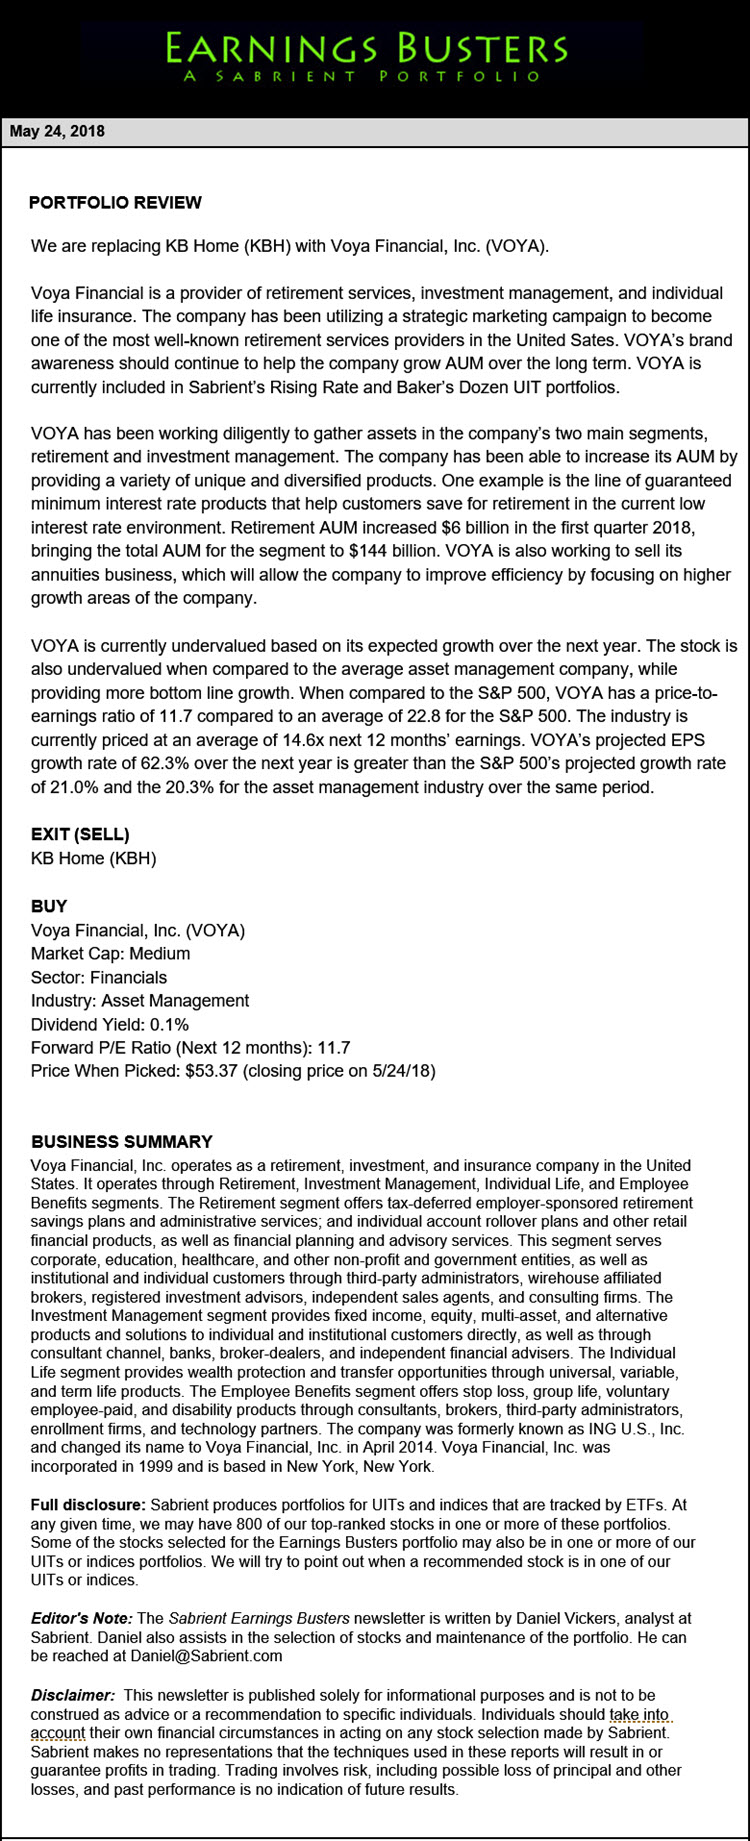 Earnings Busters Newsletter - May 24, 2018